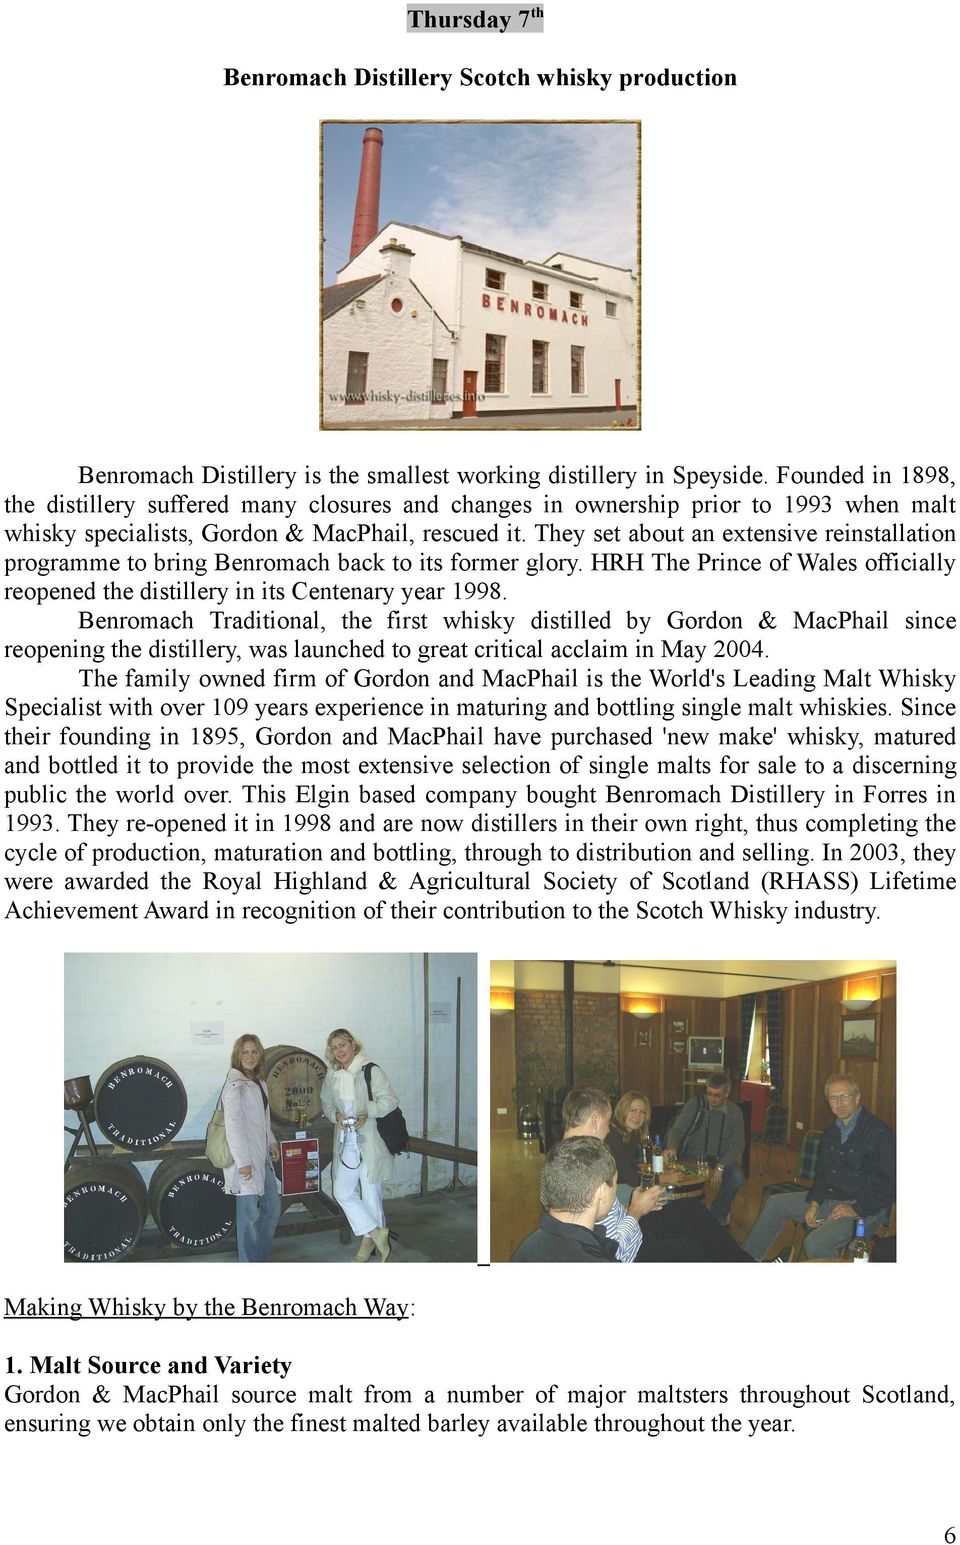 They set about an extensive reinstallation programme to bring Benromach back to its former glory. HRH The Prince of Wales officially reopened the distillery in its Centenary year 1998.